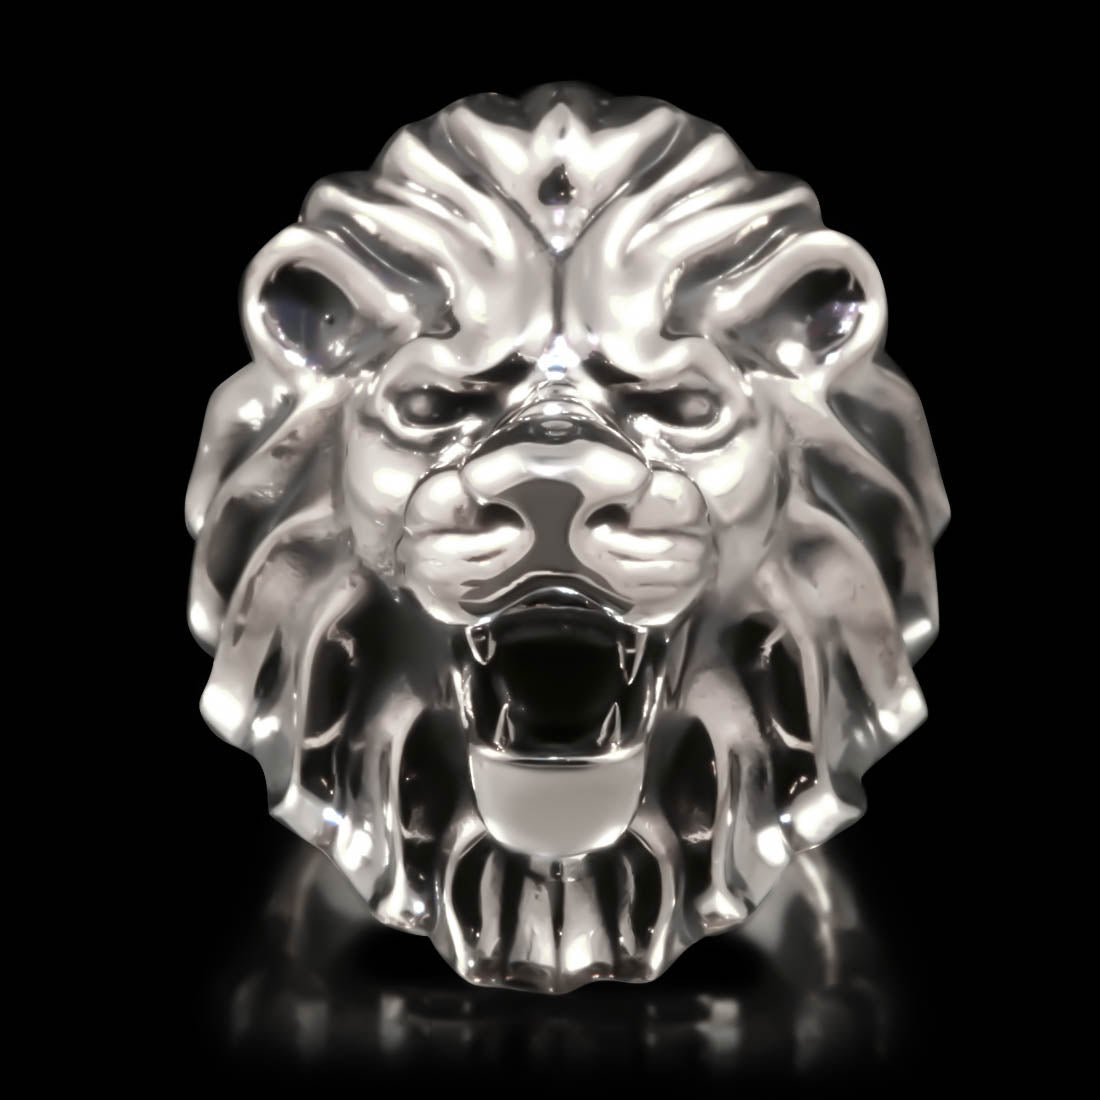 KING LION Ring for Men in Silver with Green Topaz Eyes by Ecks